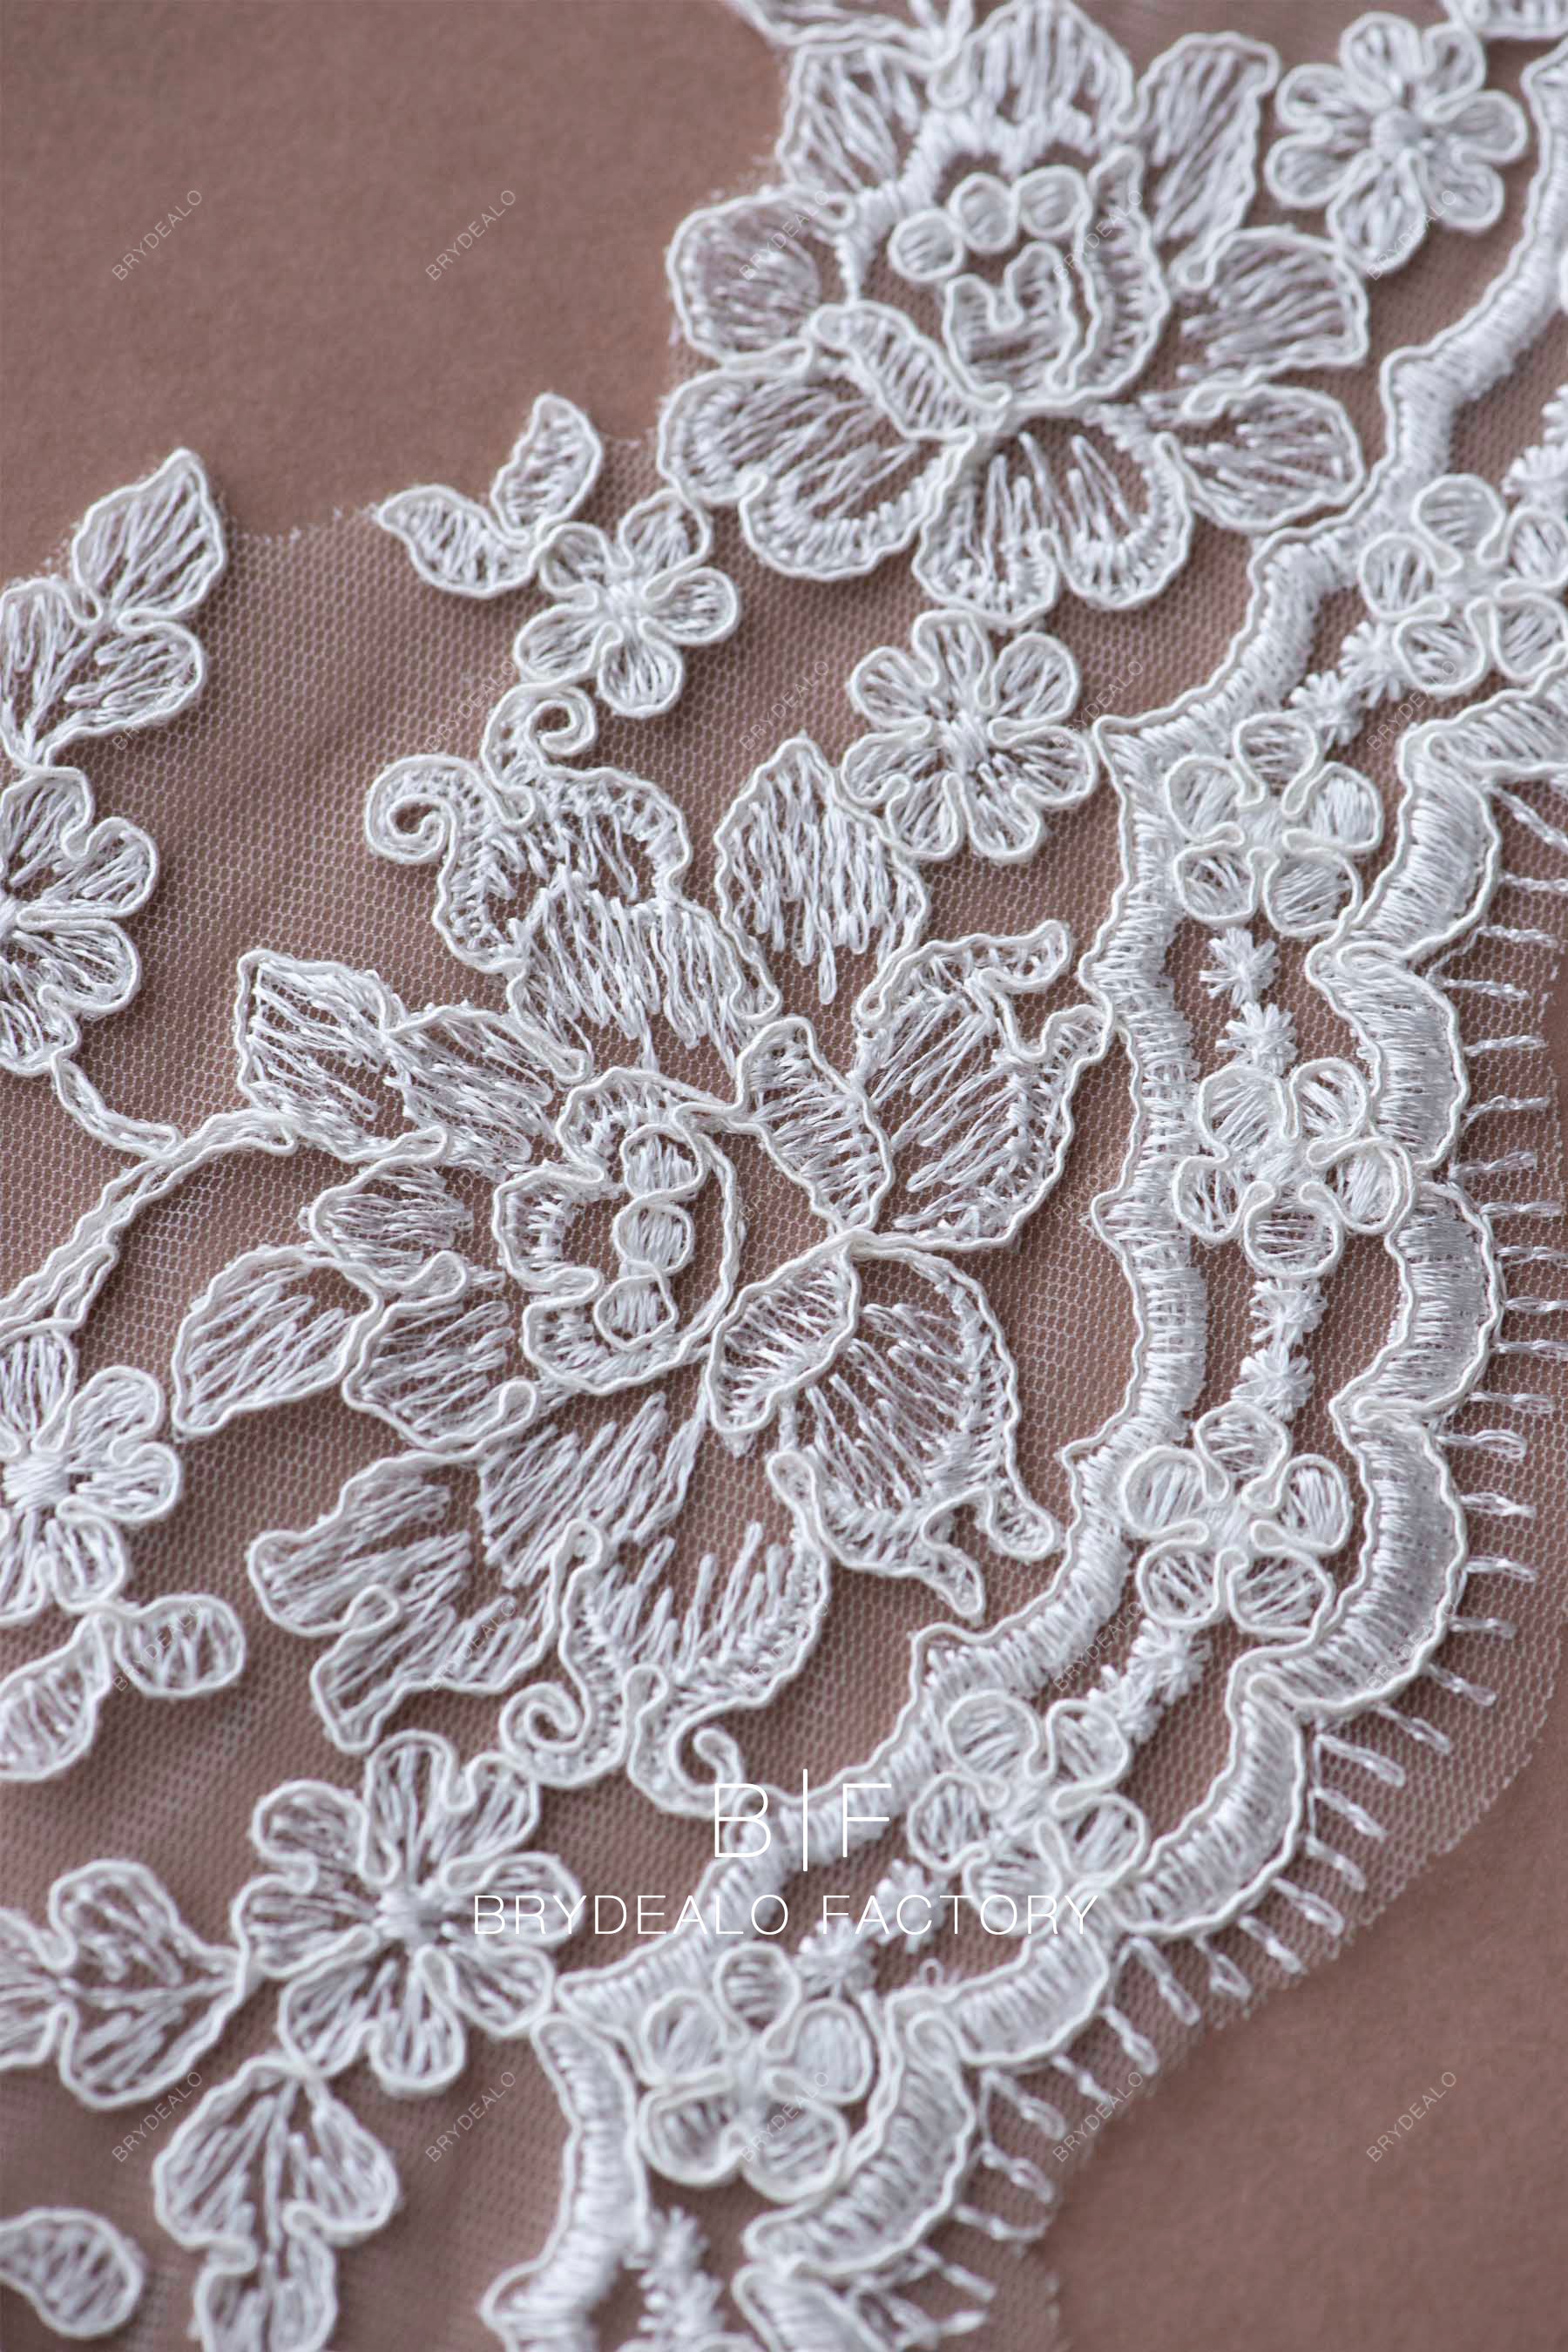 Lily 1-3/4 inches White Brown Black Venice Lace Trim Sewing Notions By Yard